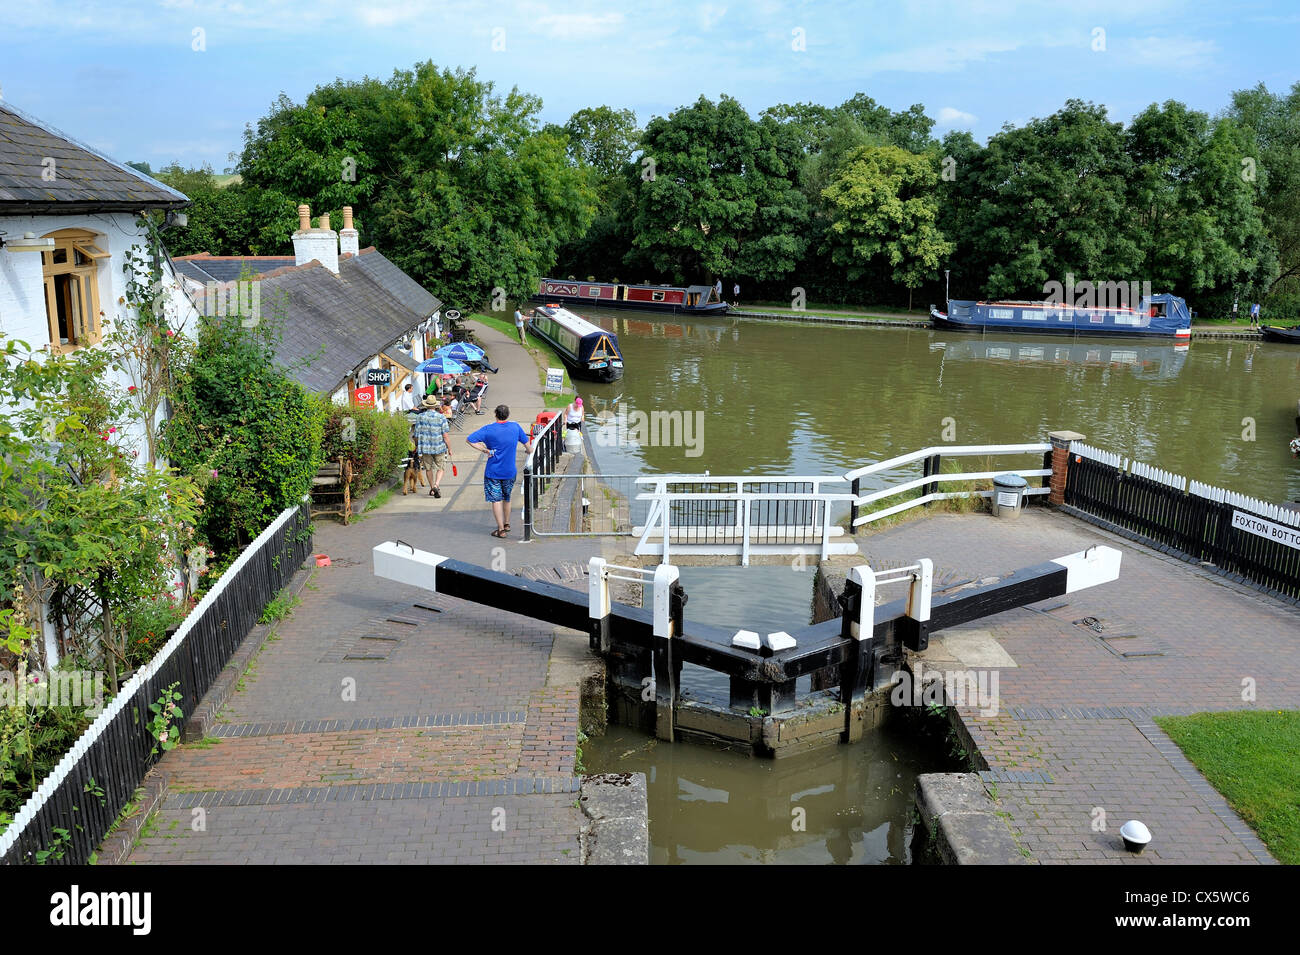 Foxton locks Grand Union canal leicestershire angleterre uk Banque D'Images